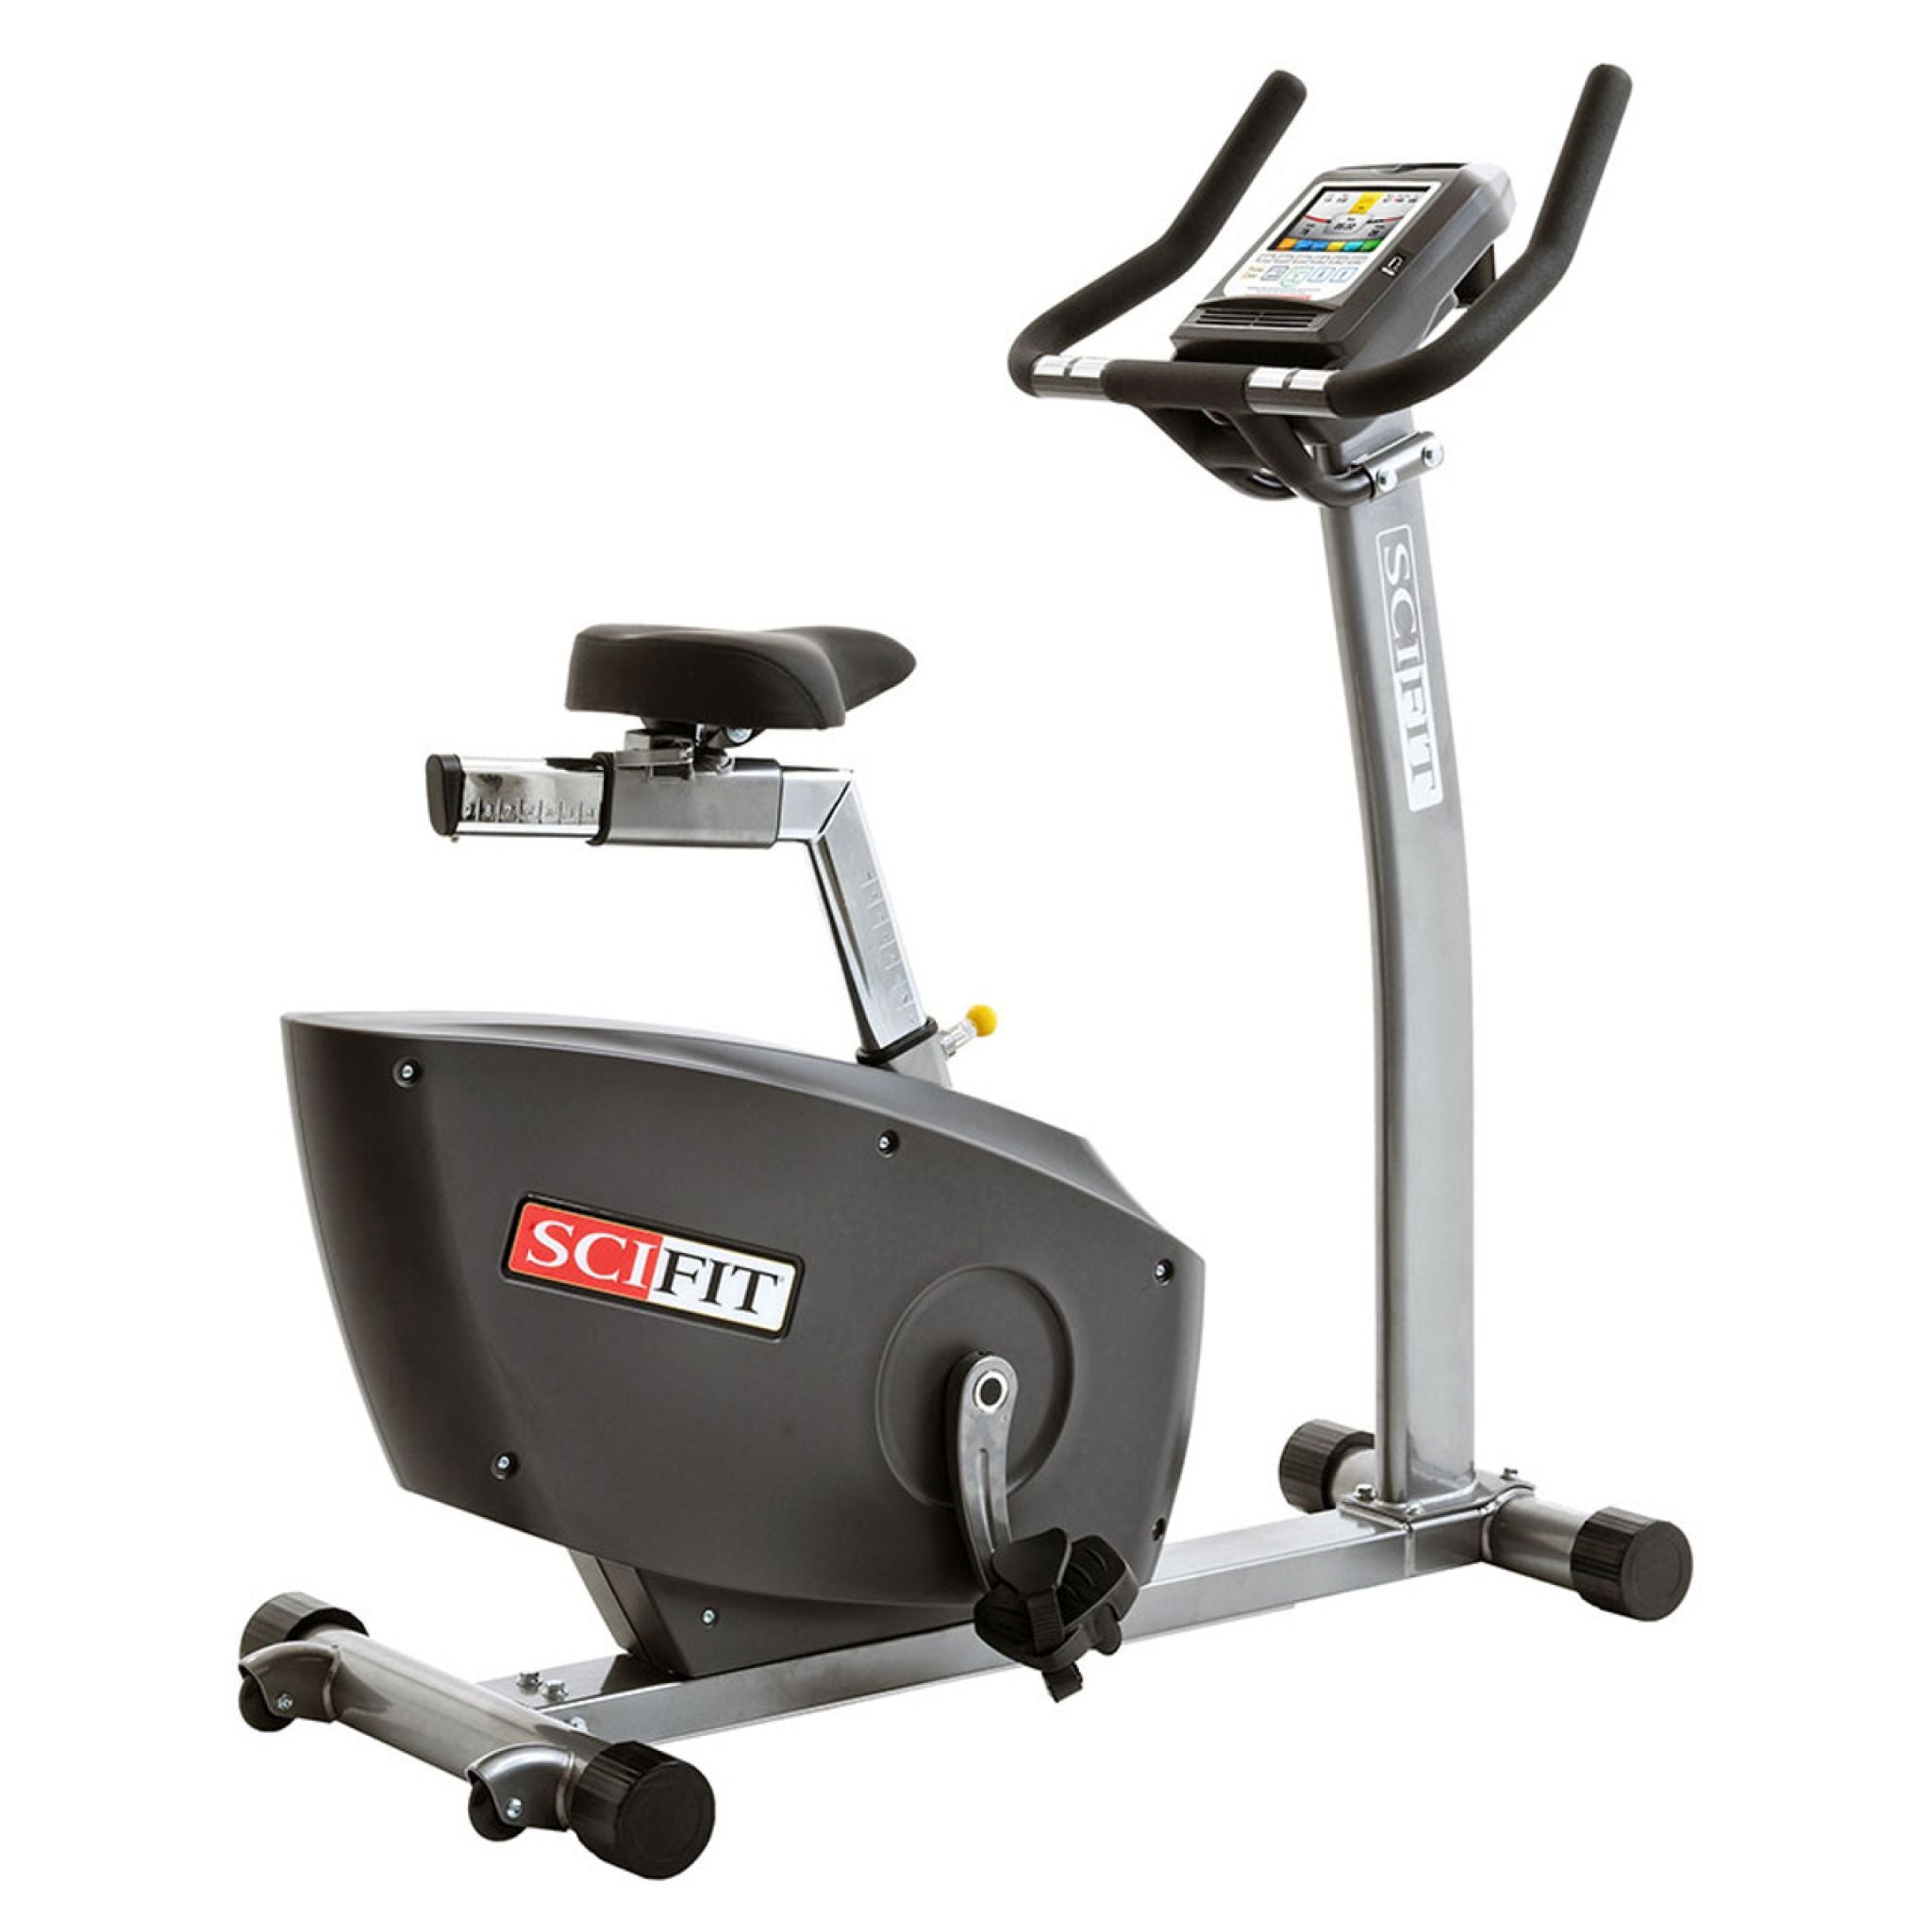 Back left view of the SciFit ISO7000 Upright Bike